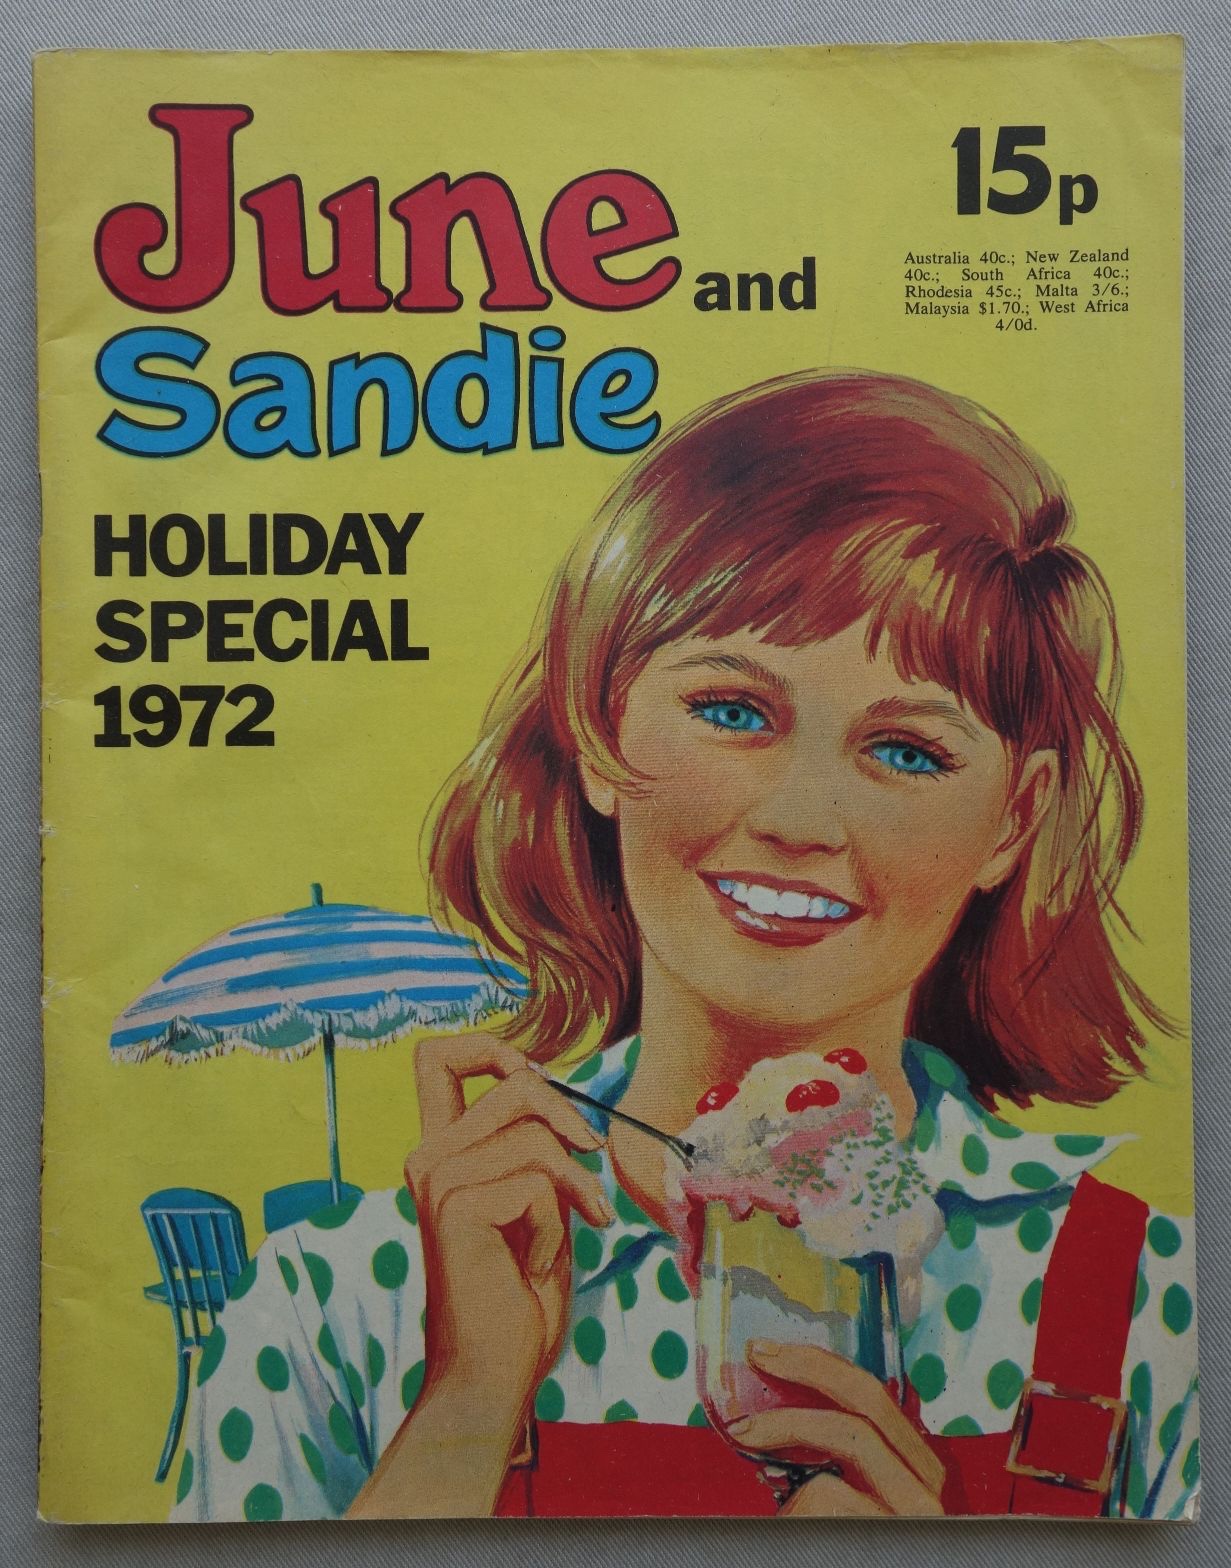 June and Sandie Holiday Special